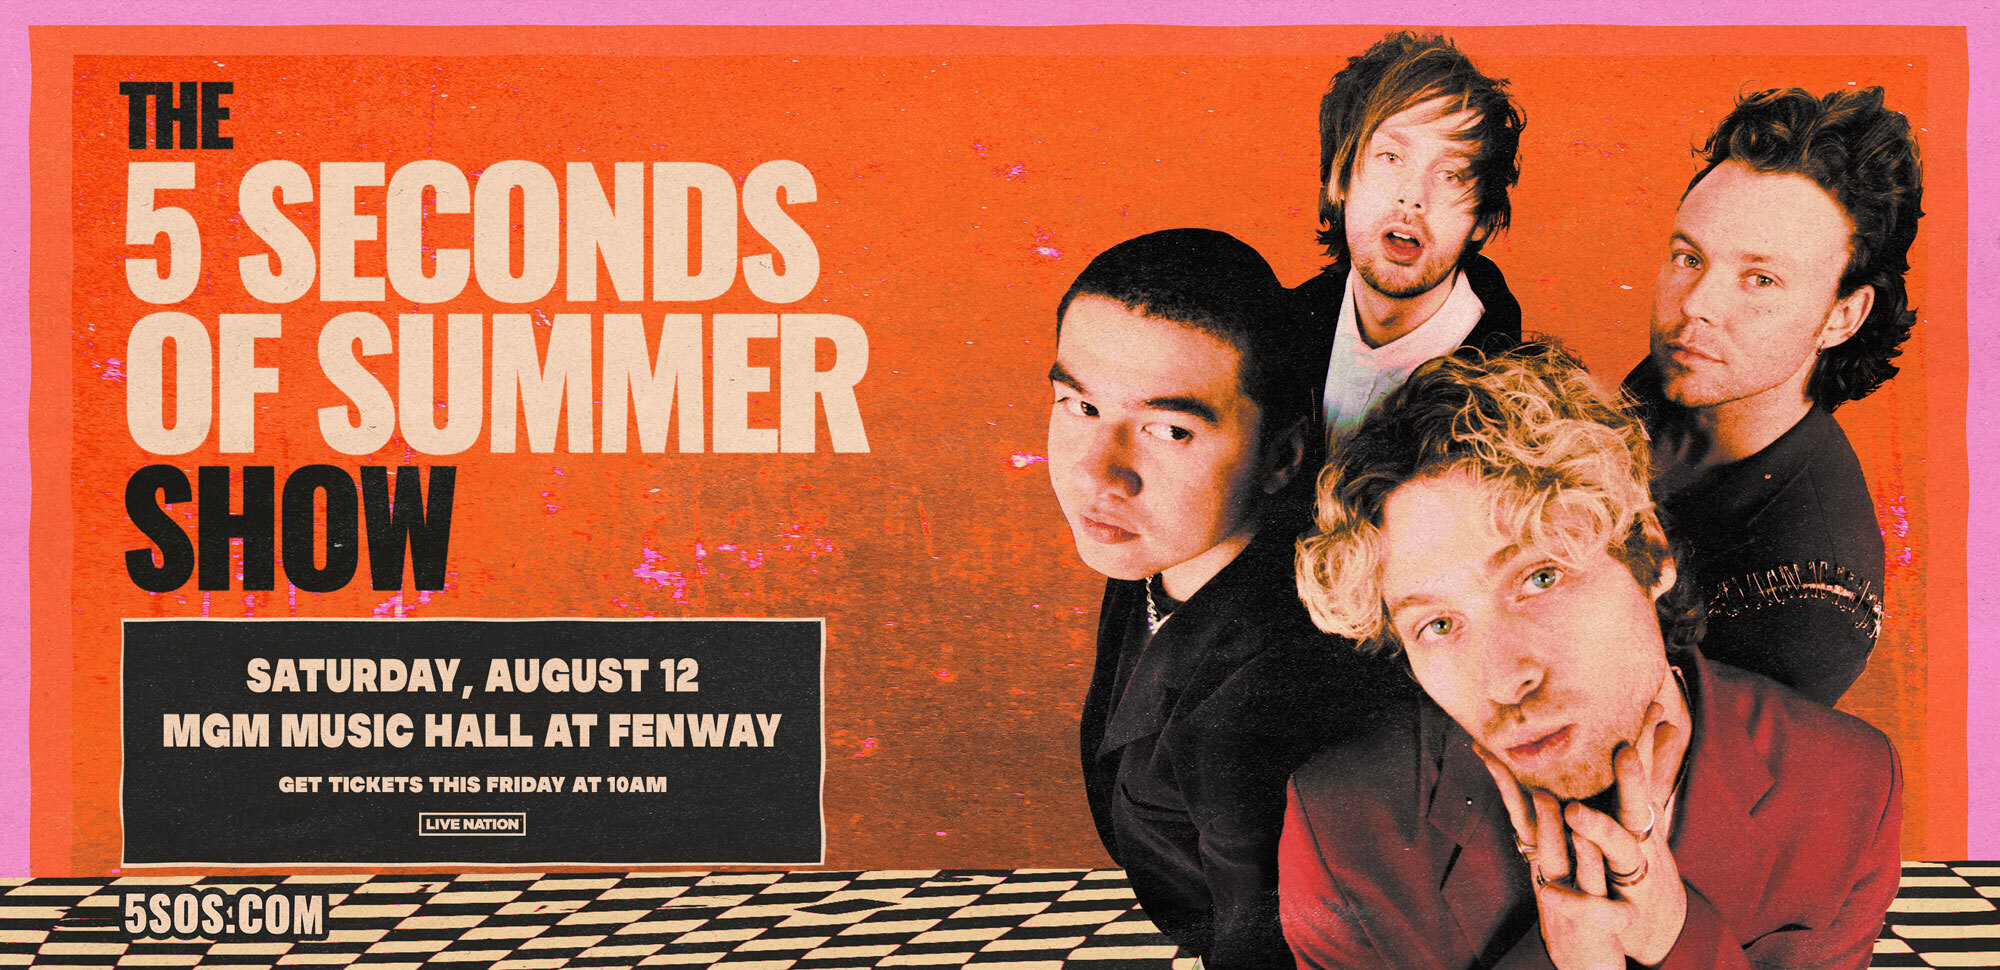 Win Tickets To 5SOS At MGM Music Hall at Fenway!